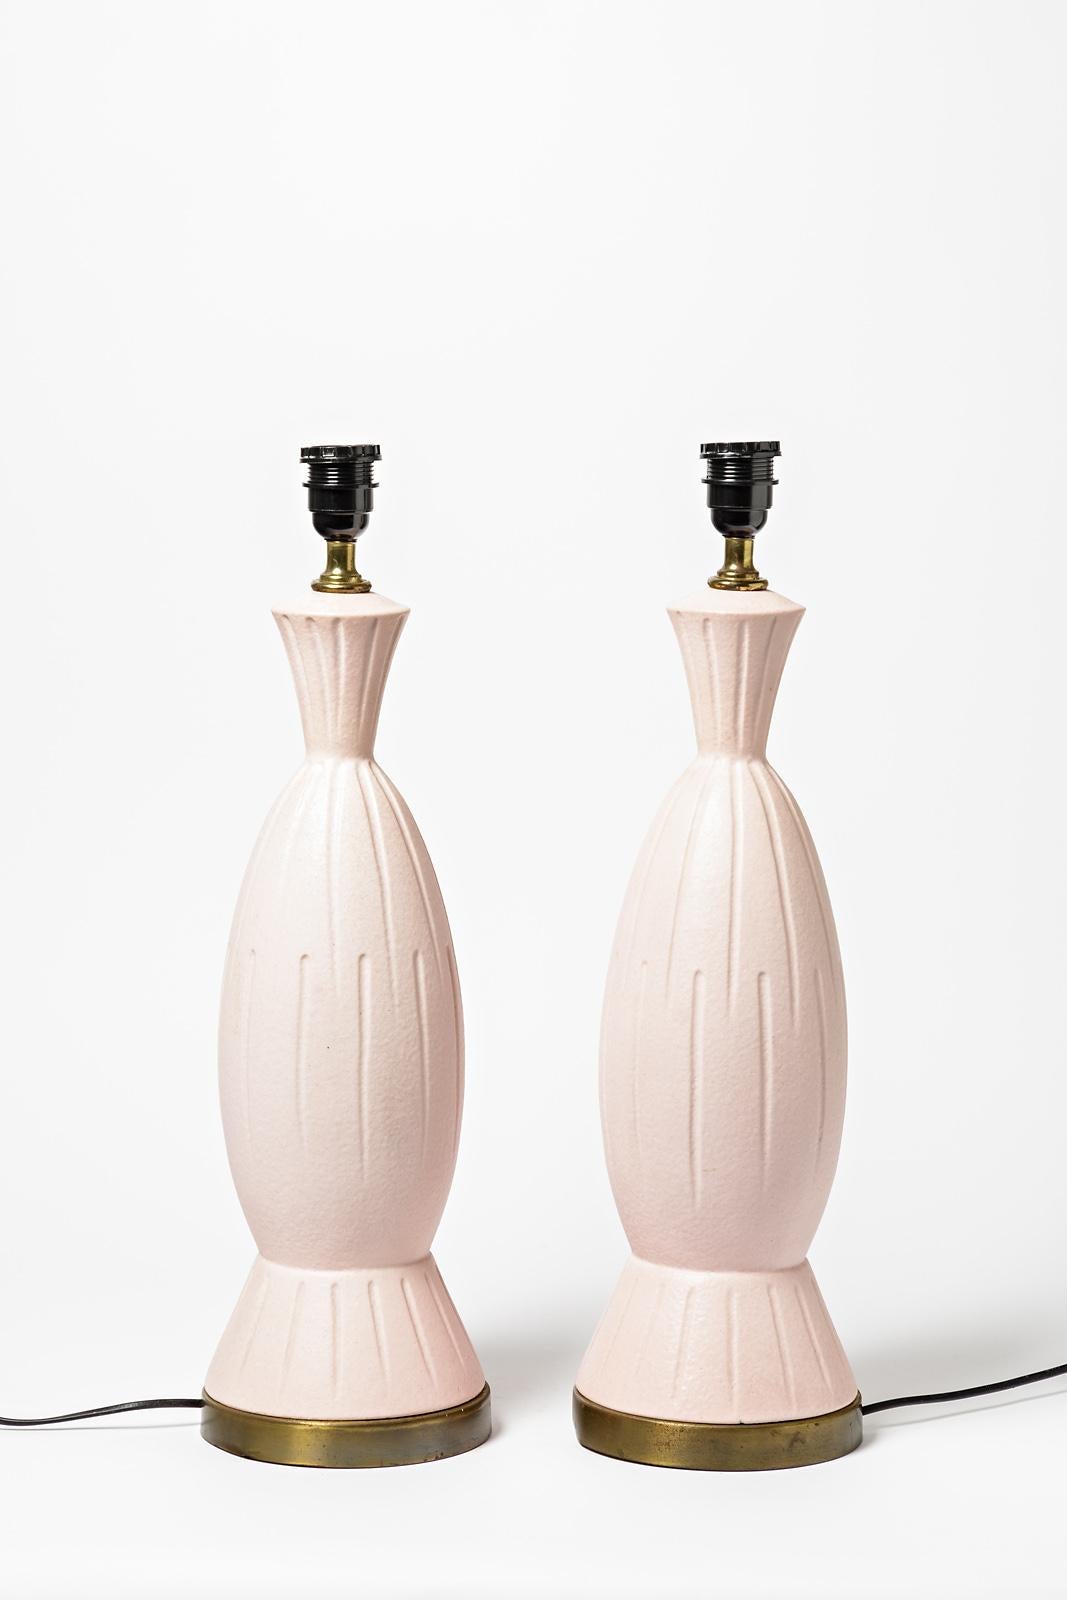 French pair of ceramic table lamps

Realised circa 1970

20th mid century design 

Large pair of table lamps with light pink ceramic glaze colors

Electrical system is new

Original good condition - very slight oxidation on the metal foot